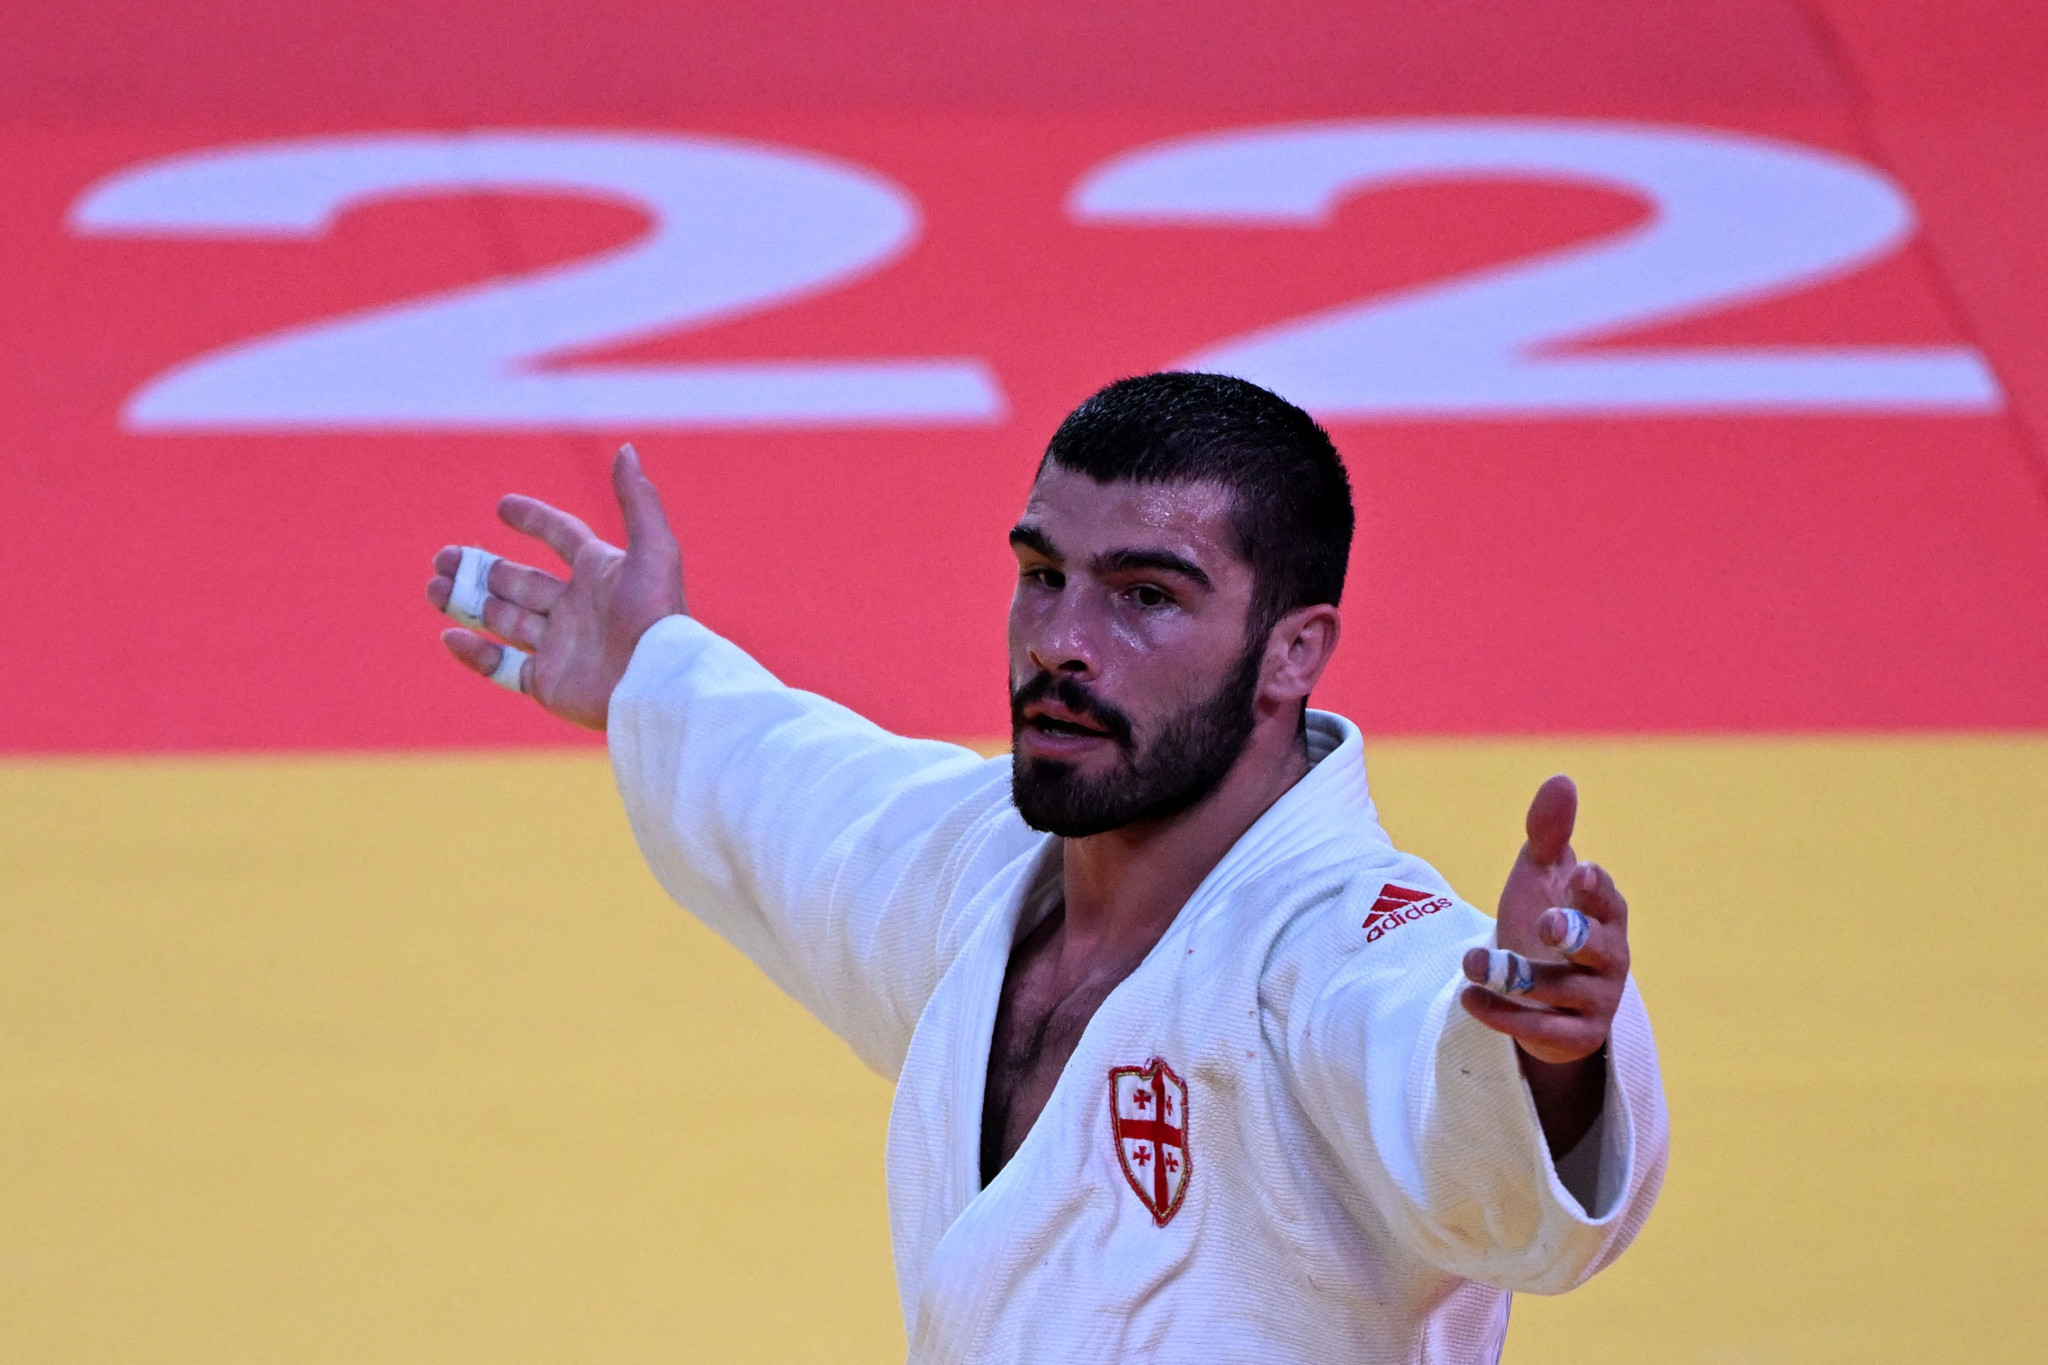 The crowd erupted when Grigalashvili slammed his opponent to the tatami, in what was the first final of the event not to feature a Japanese judoka ©Getty Images